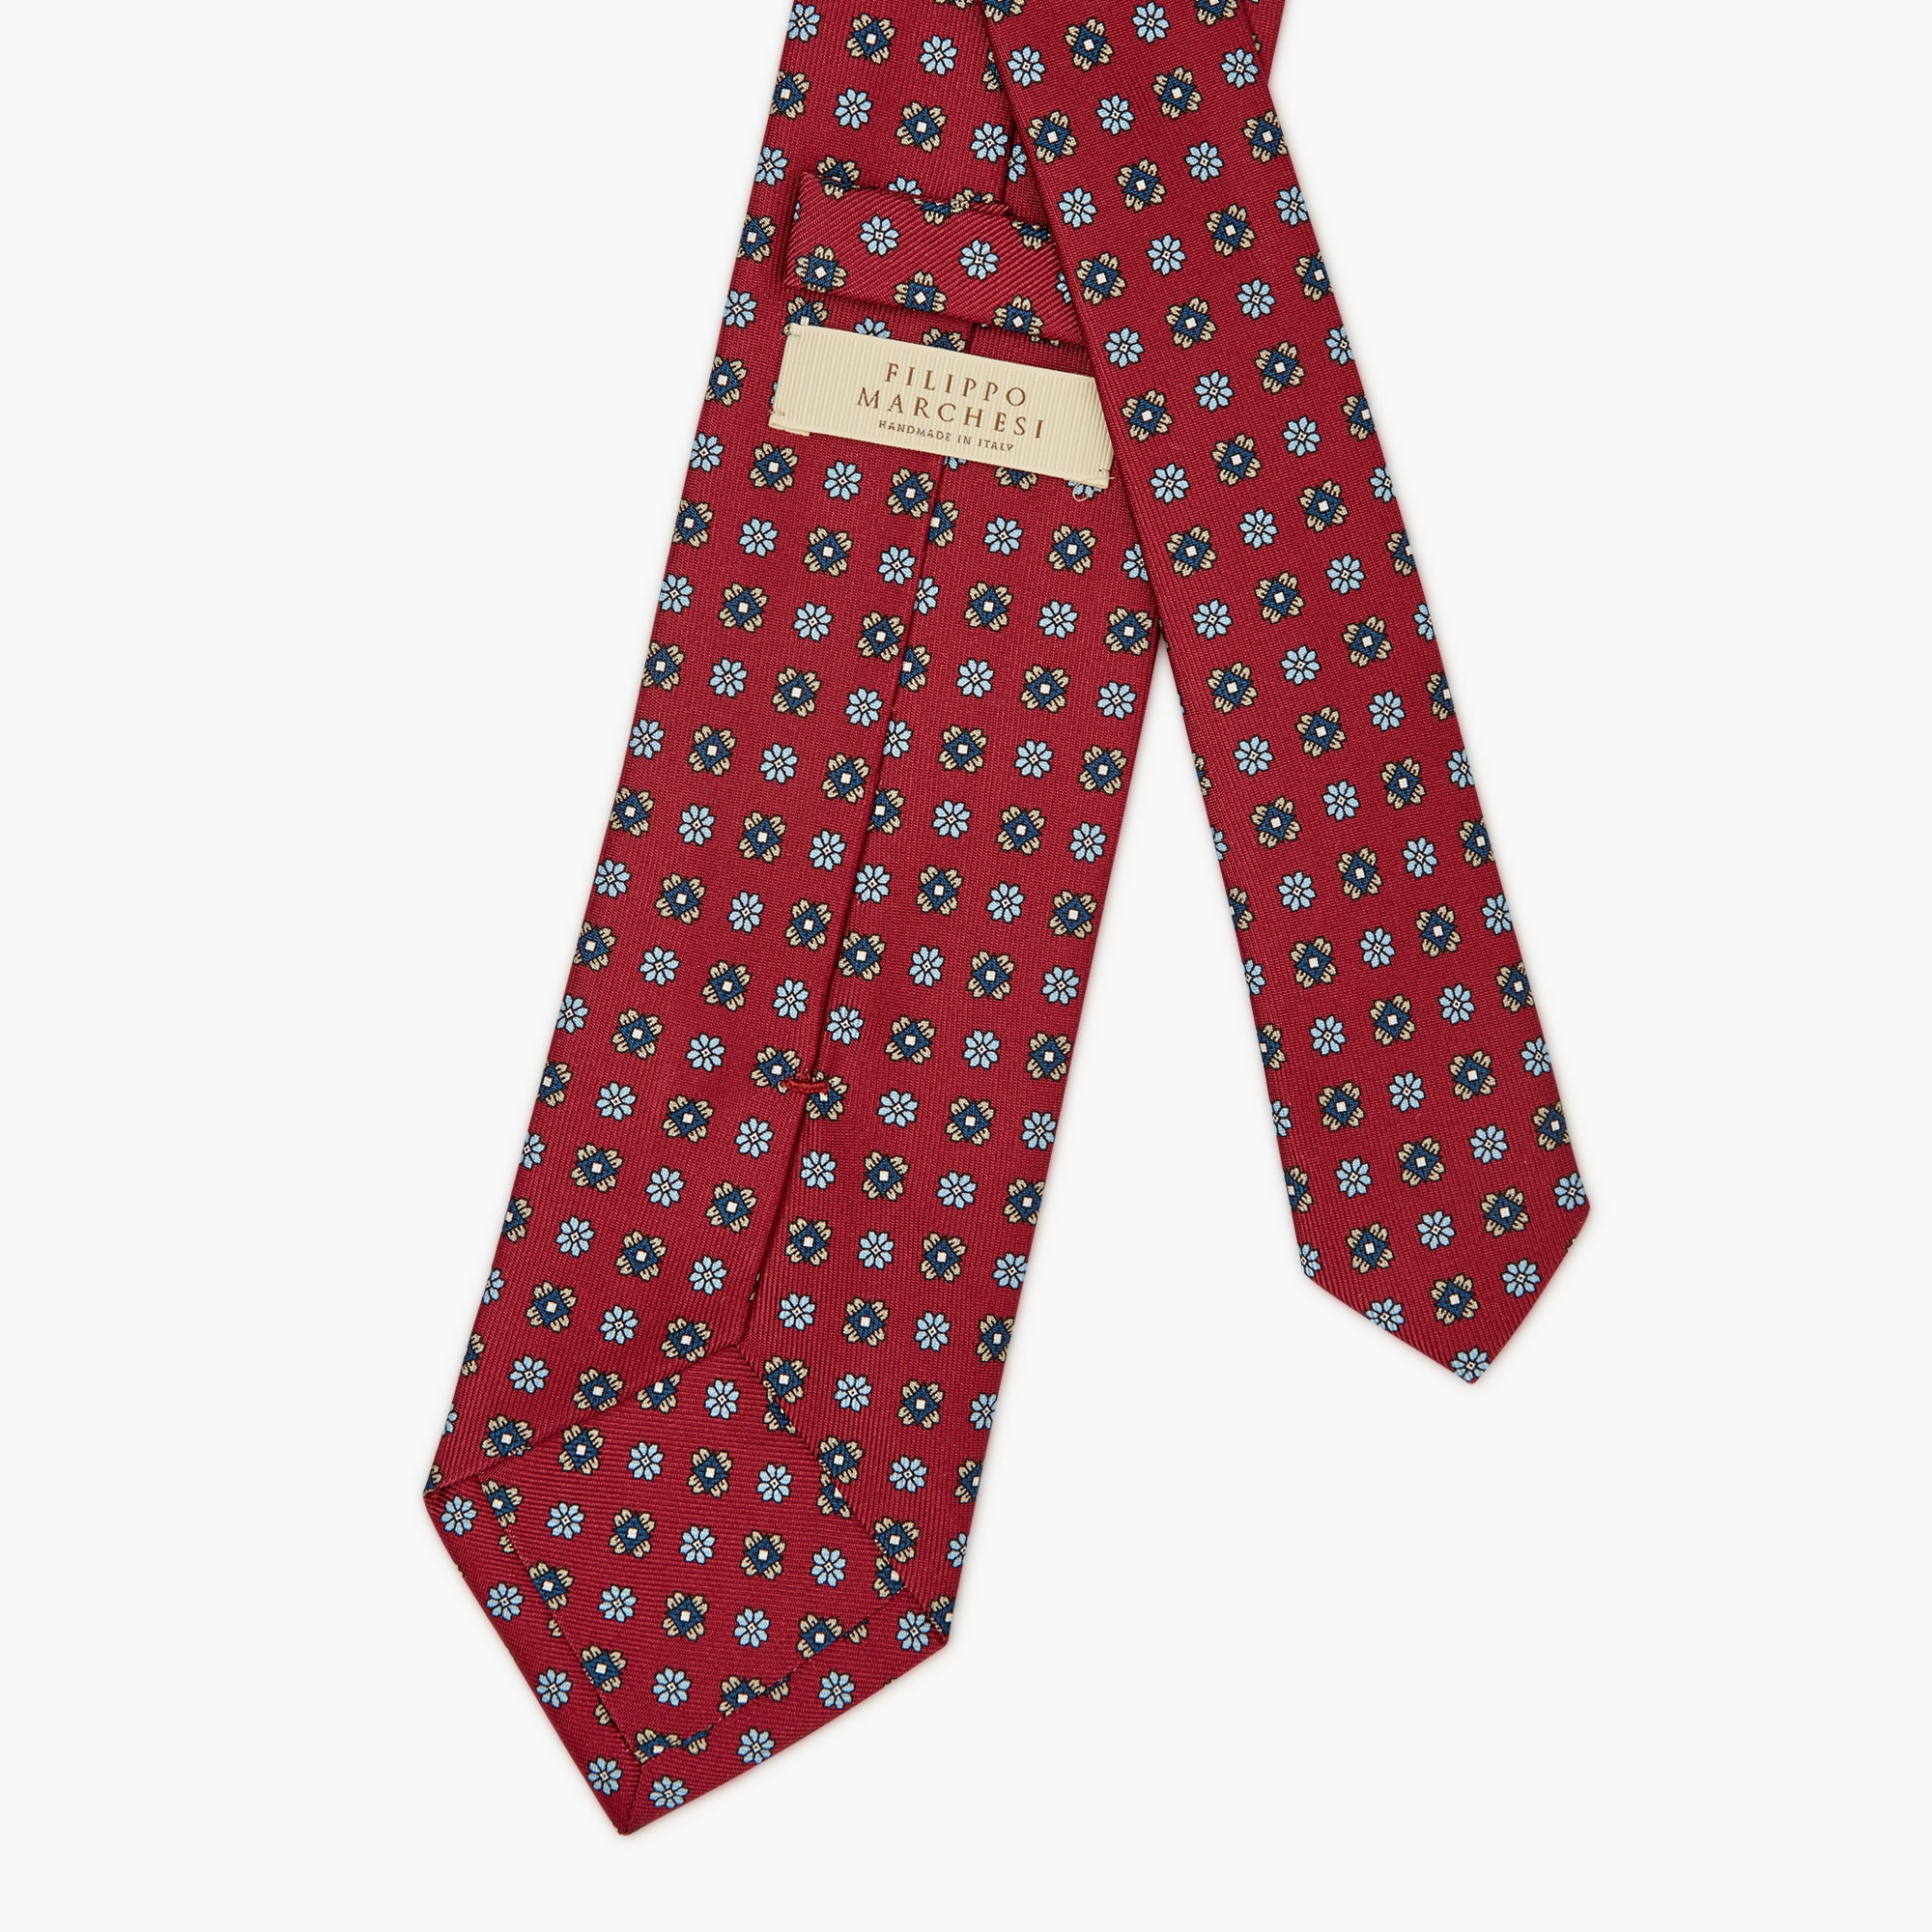 3-Fold Floral Printed English Silk Tie - Grape Red